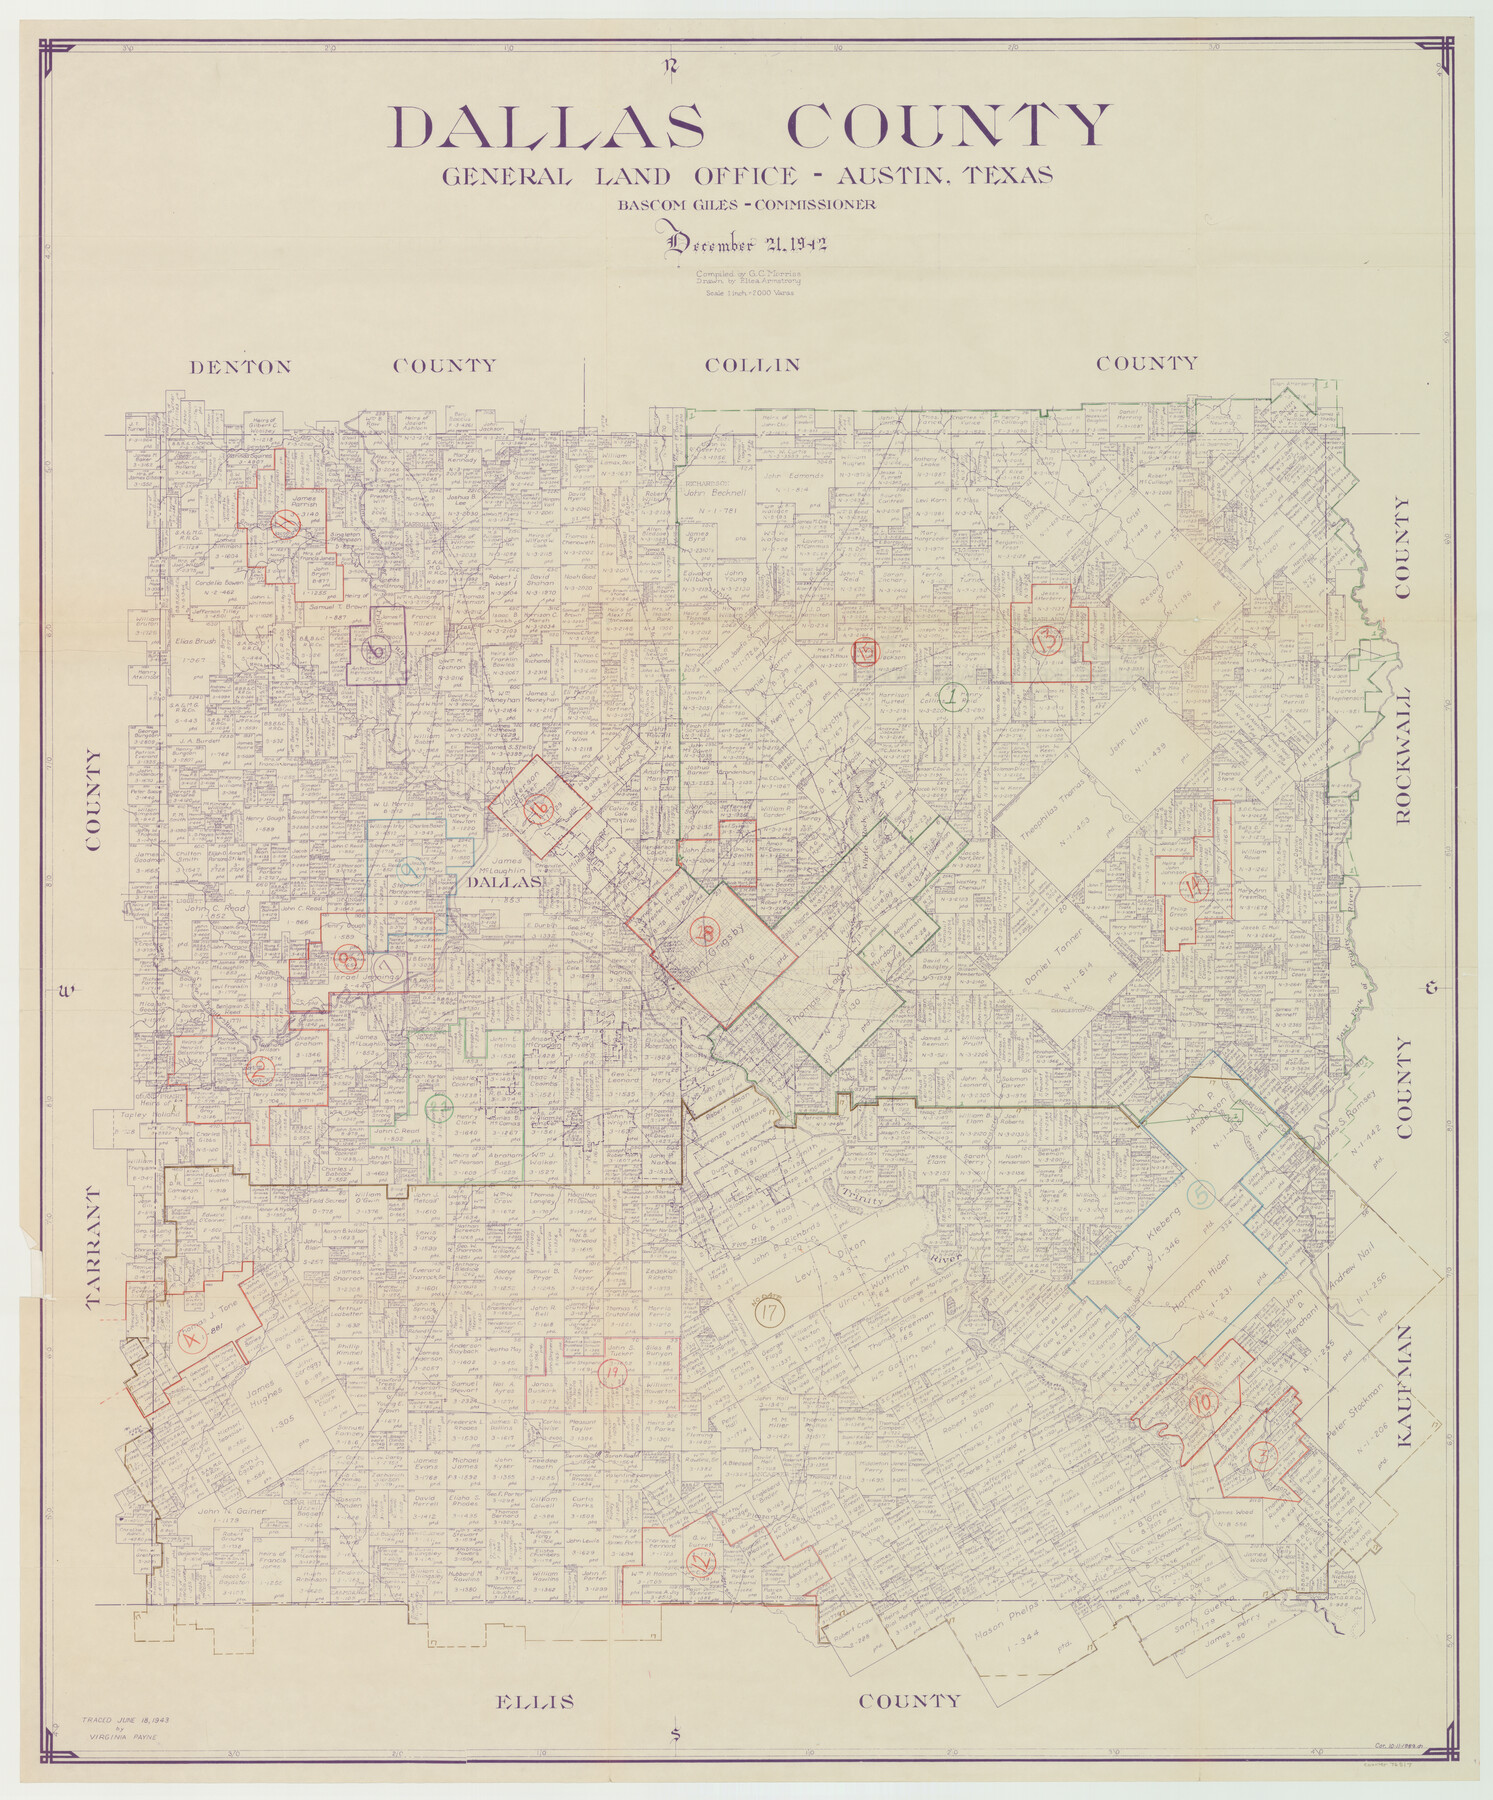 76517, Dallas County Working Sketch Graphic Index, General Map Collection